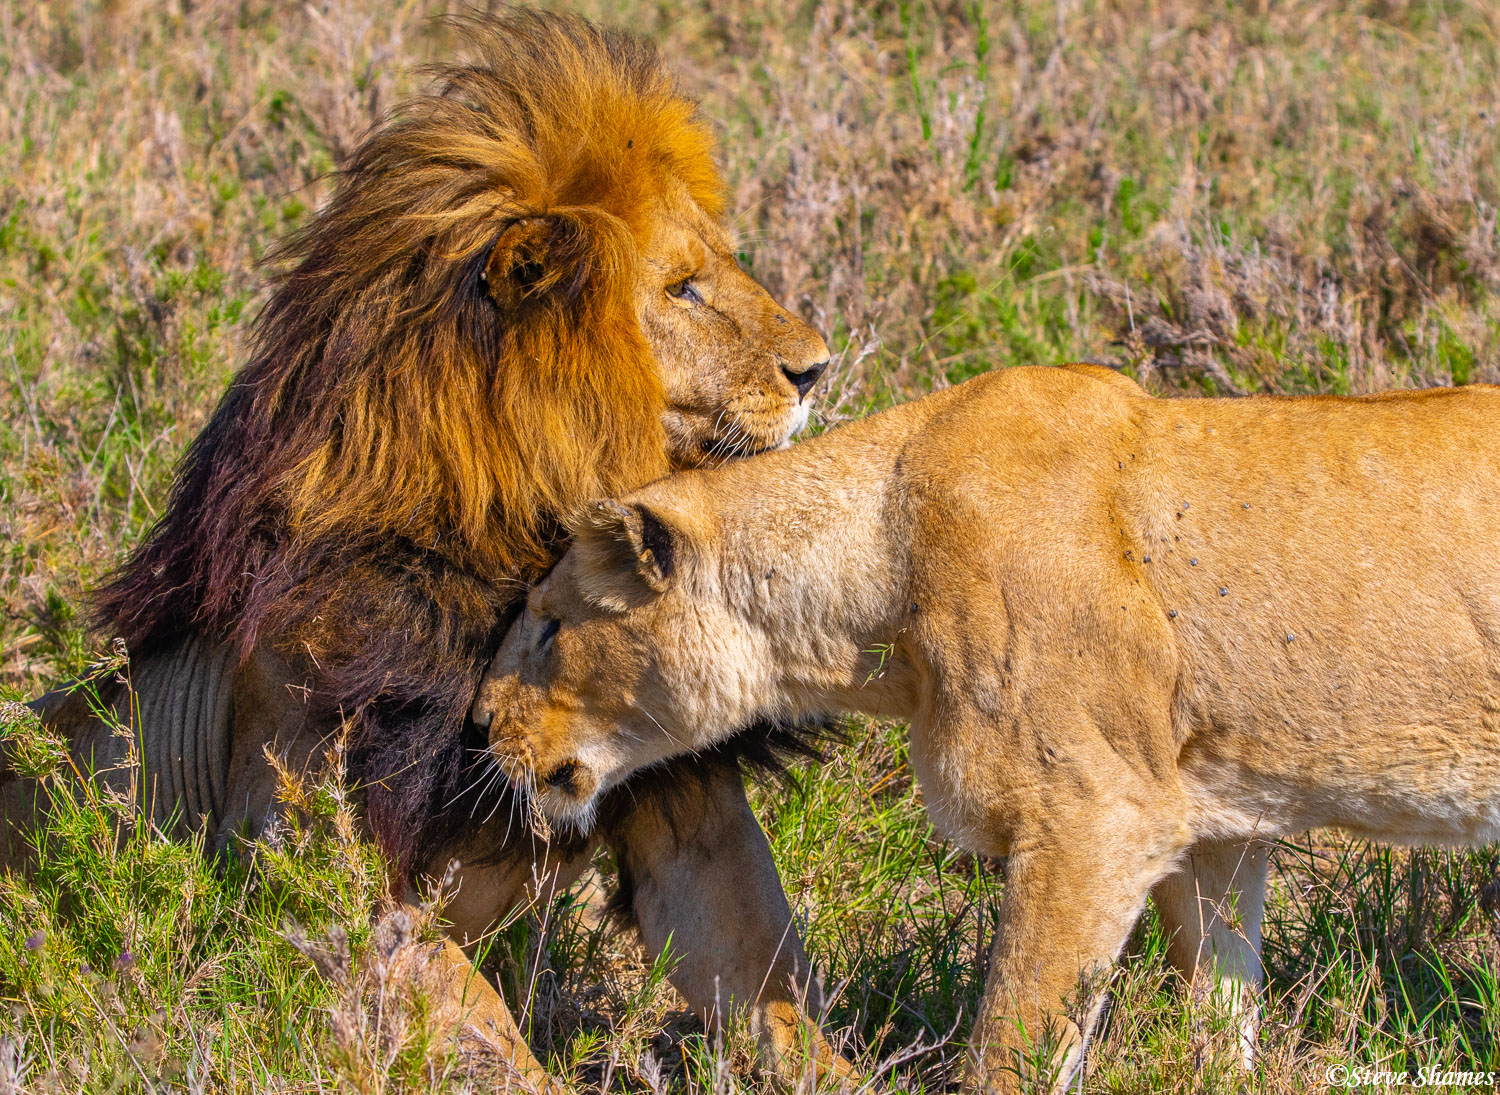 When lions go off for a few days of mating, they are called "honeymooning". We stayed with this couple for about 45 minutes...